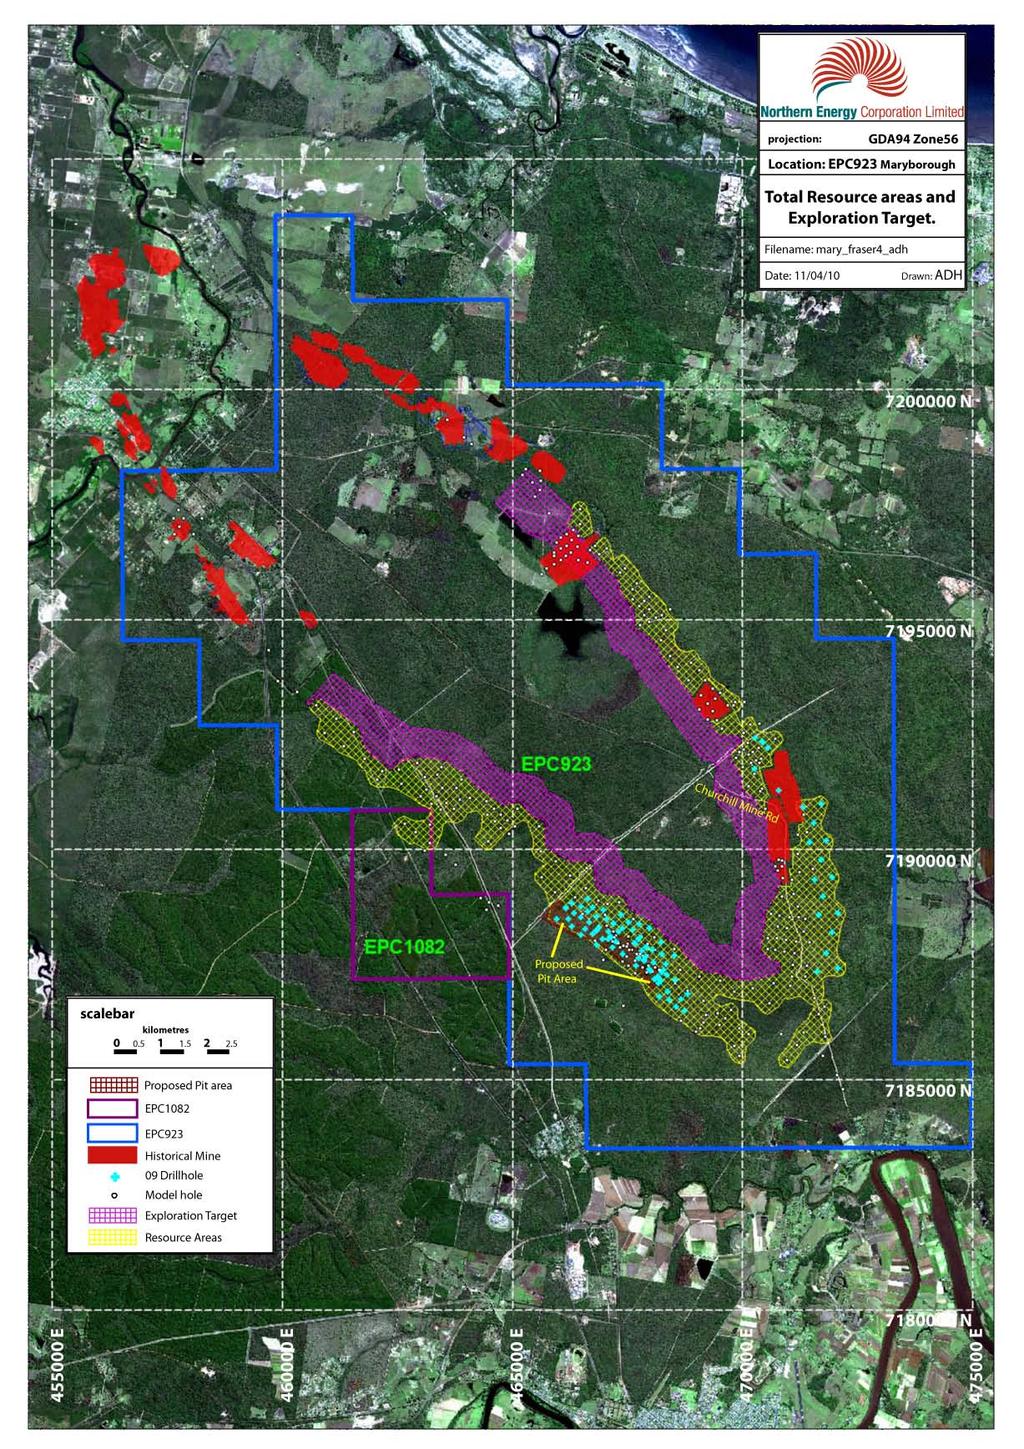 Figure 1 Plan showing Maryborough Resource and Exploration Target Areas